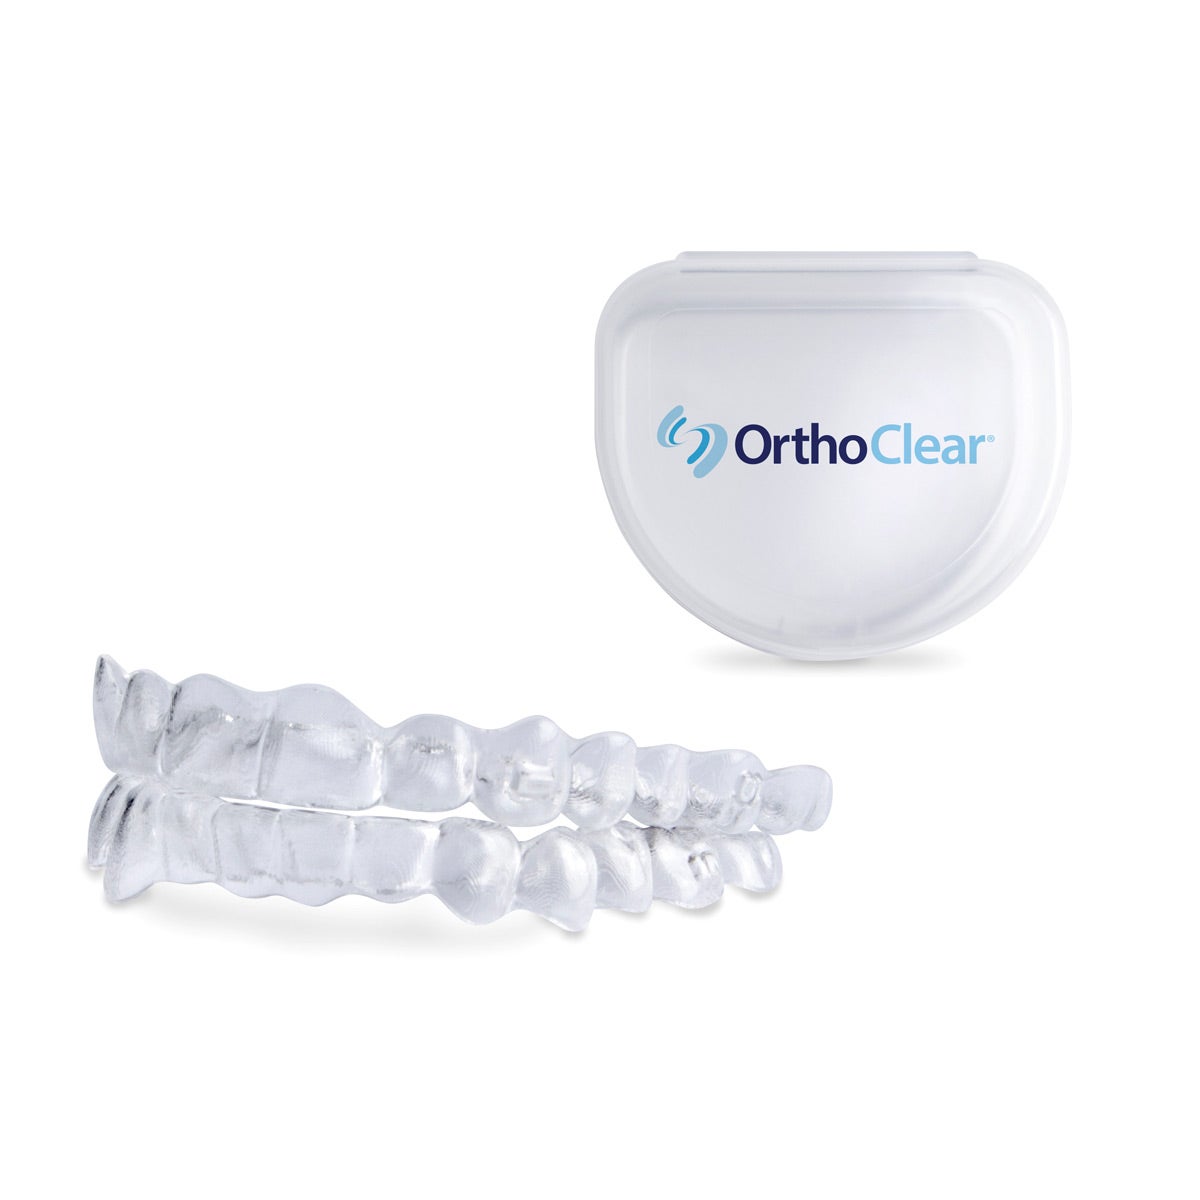 Introducing OrthoClear™ Aligners